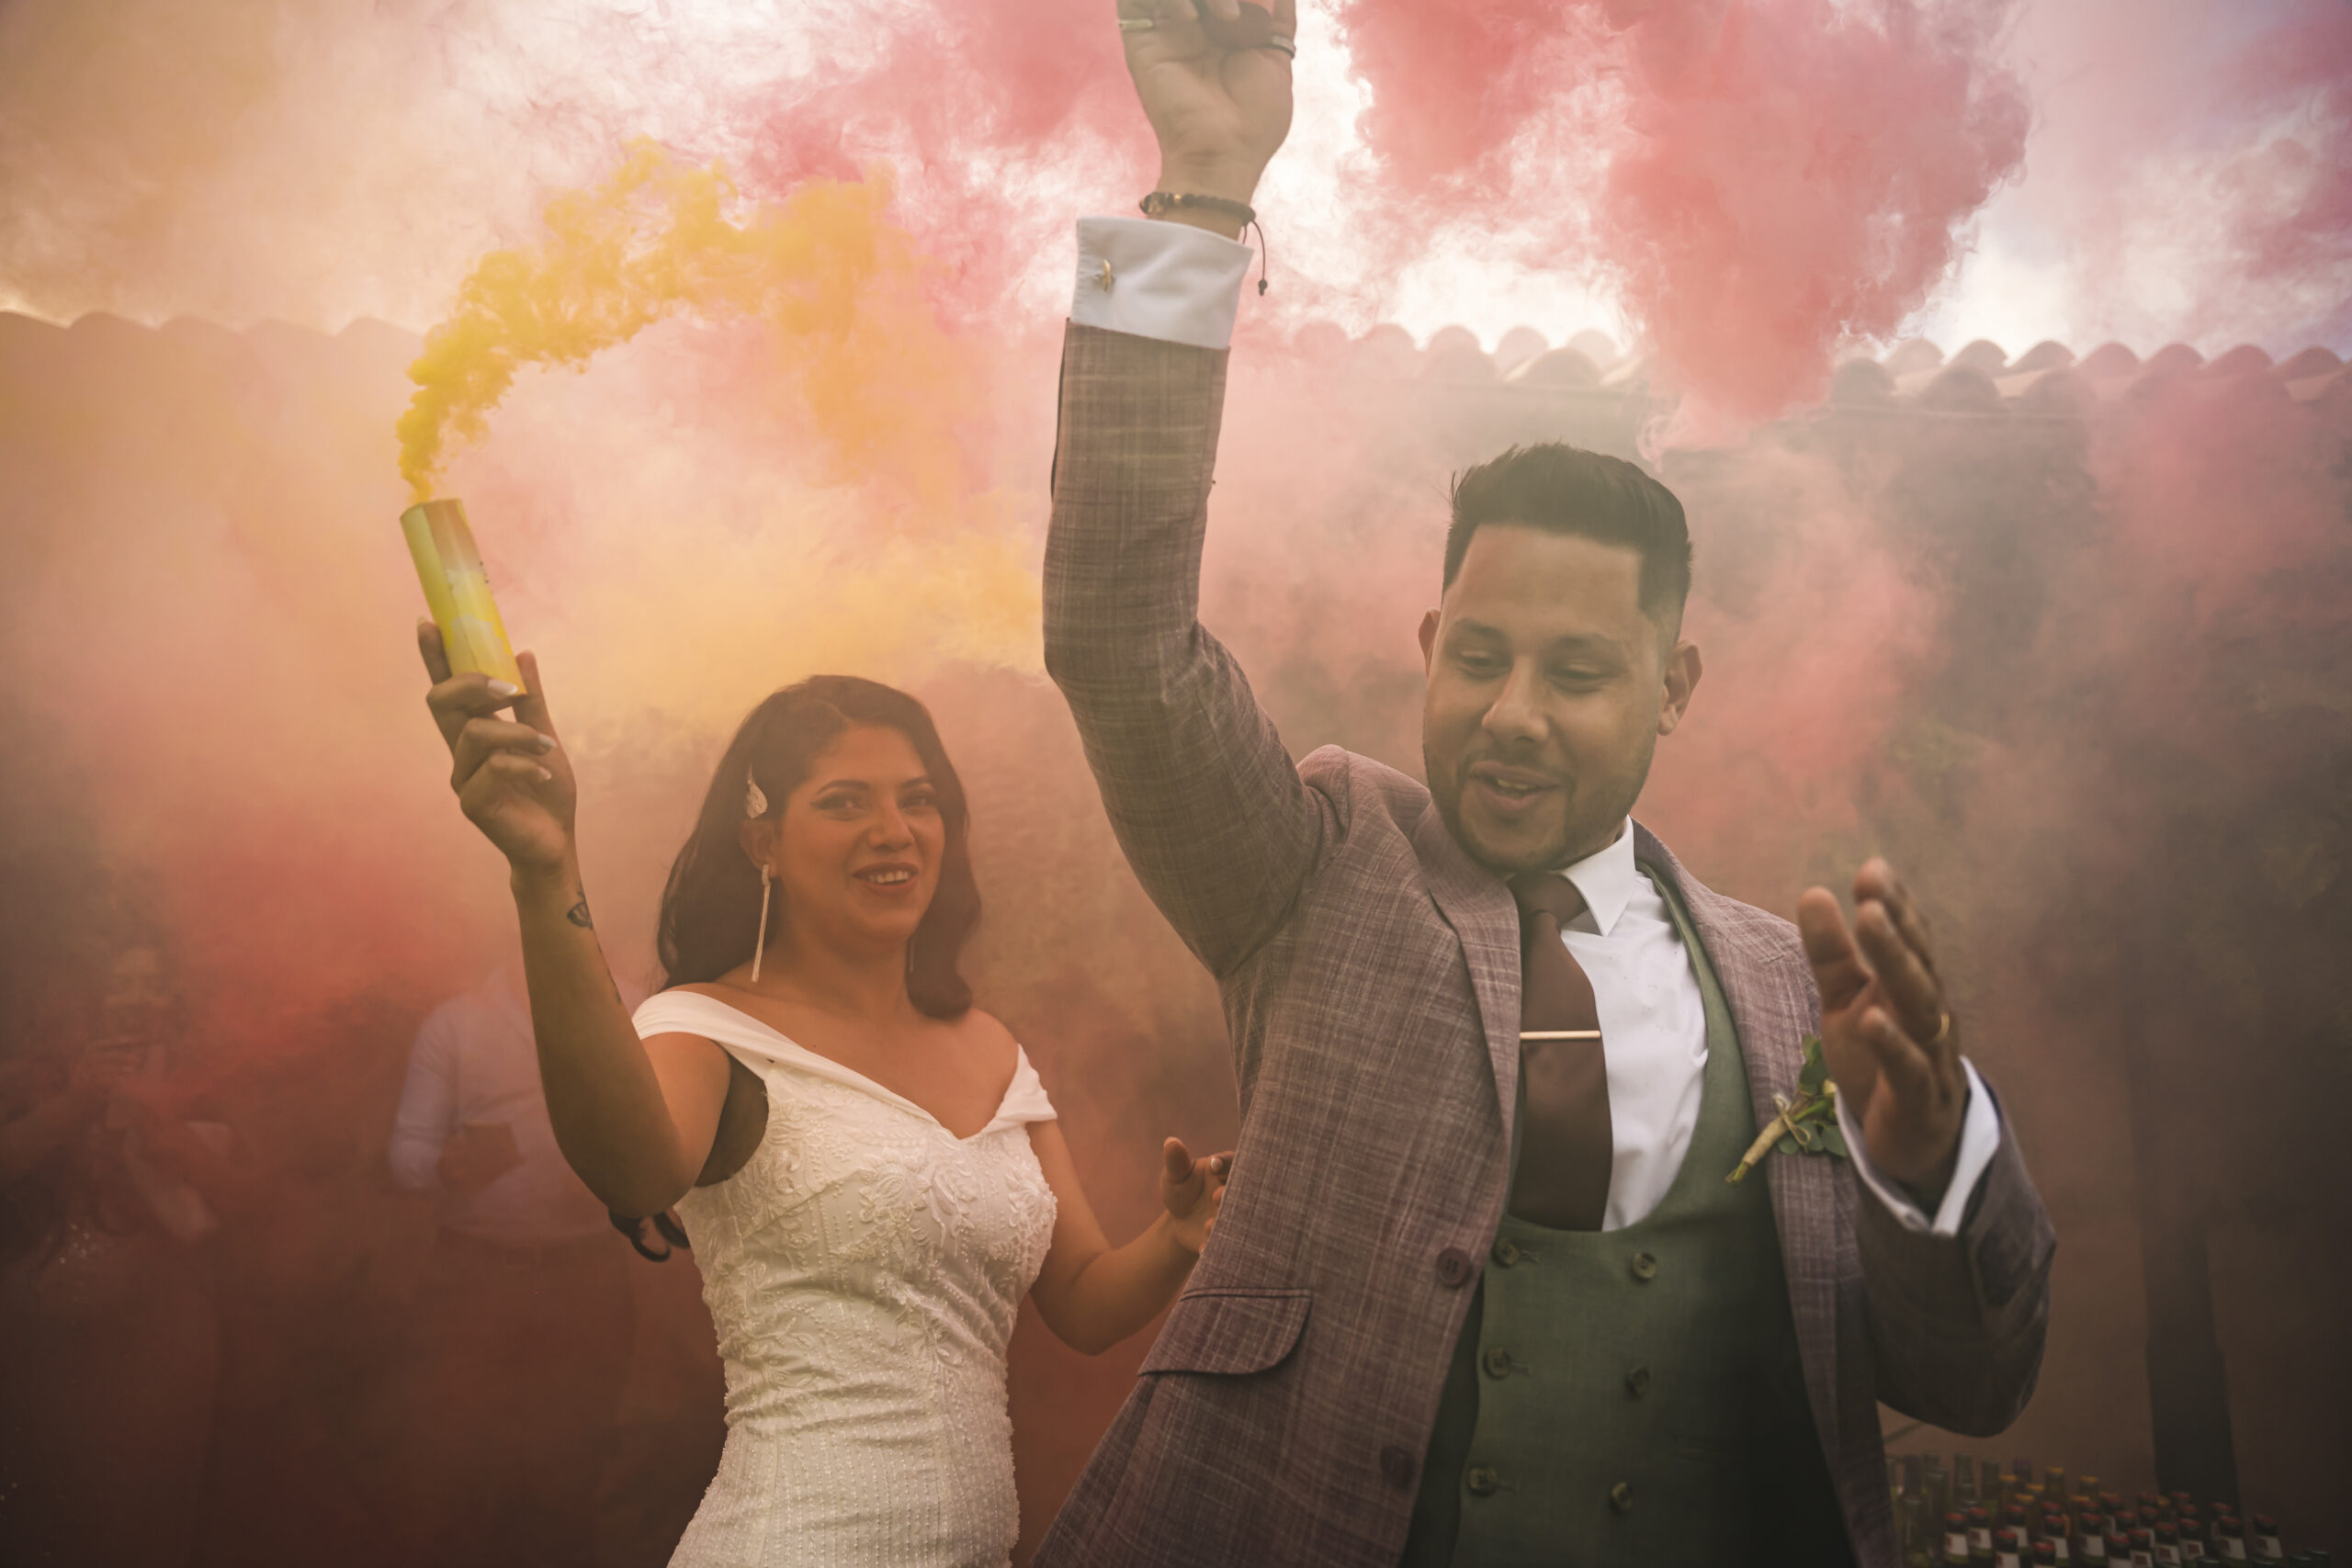 COLORED SMOKE FOR WEDDINGS, AN UNFORGETTABLE OPTION !!